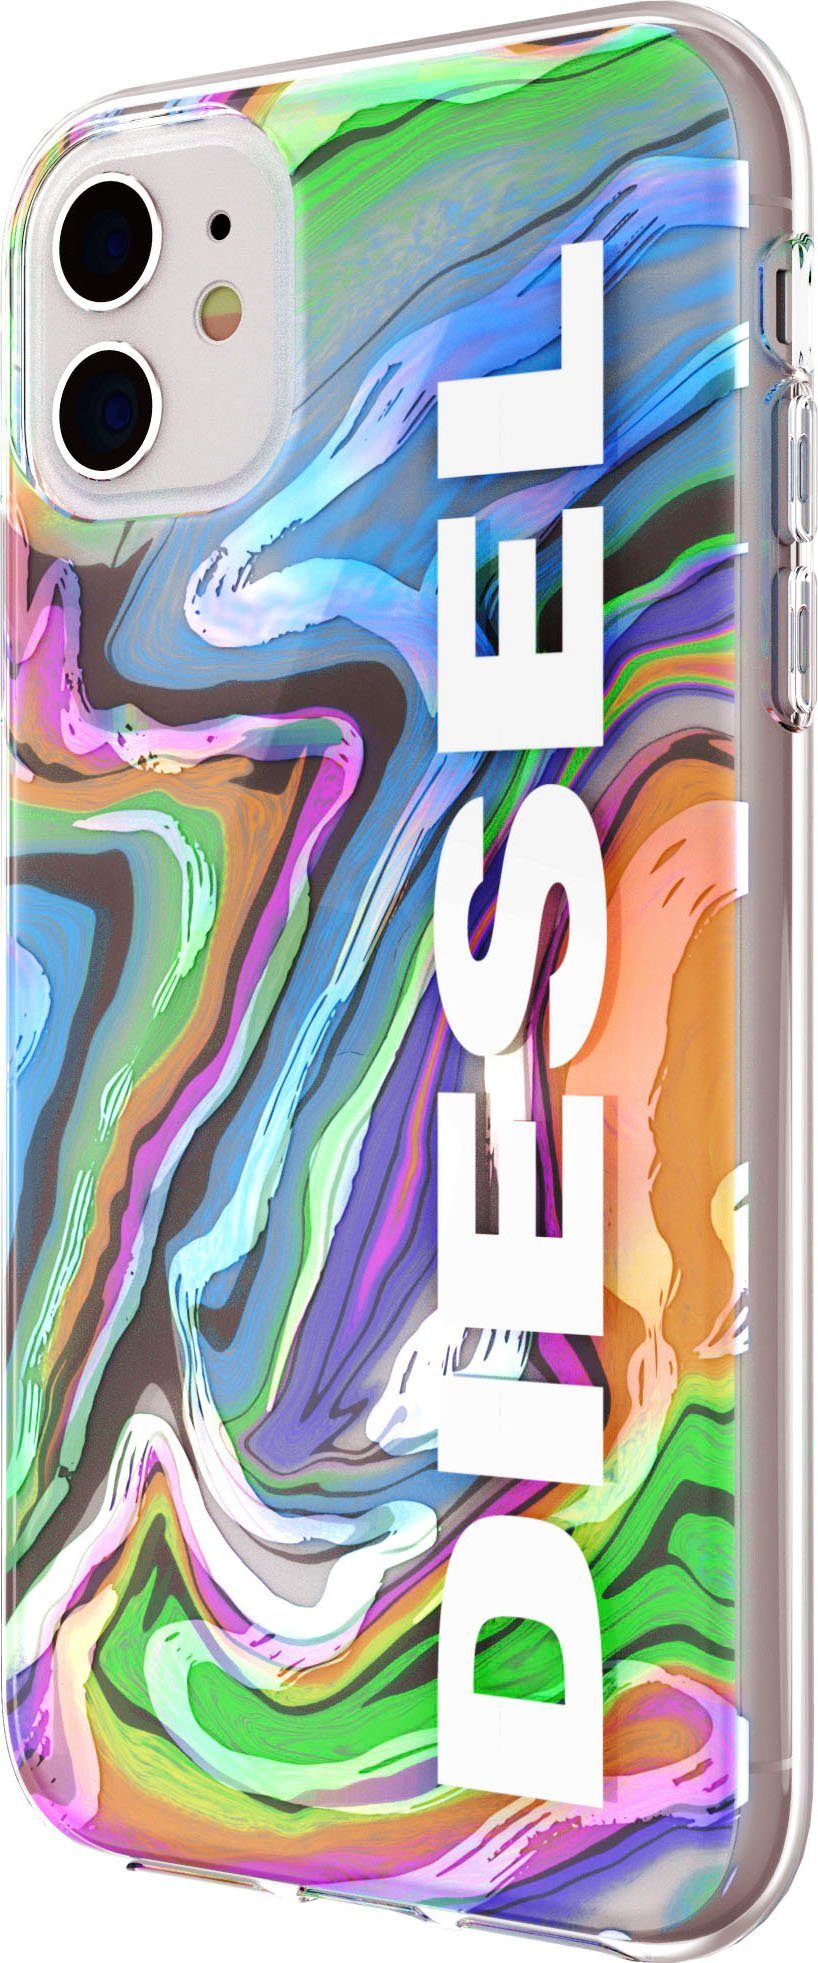 Diesel Smartphone-Hülle »Clear Case Digital Holographic AOP SS21« iPhone 11  15,5 cm (6,1 Zoll) online kaufen | OTTO